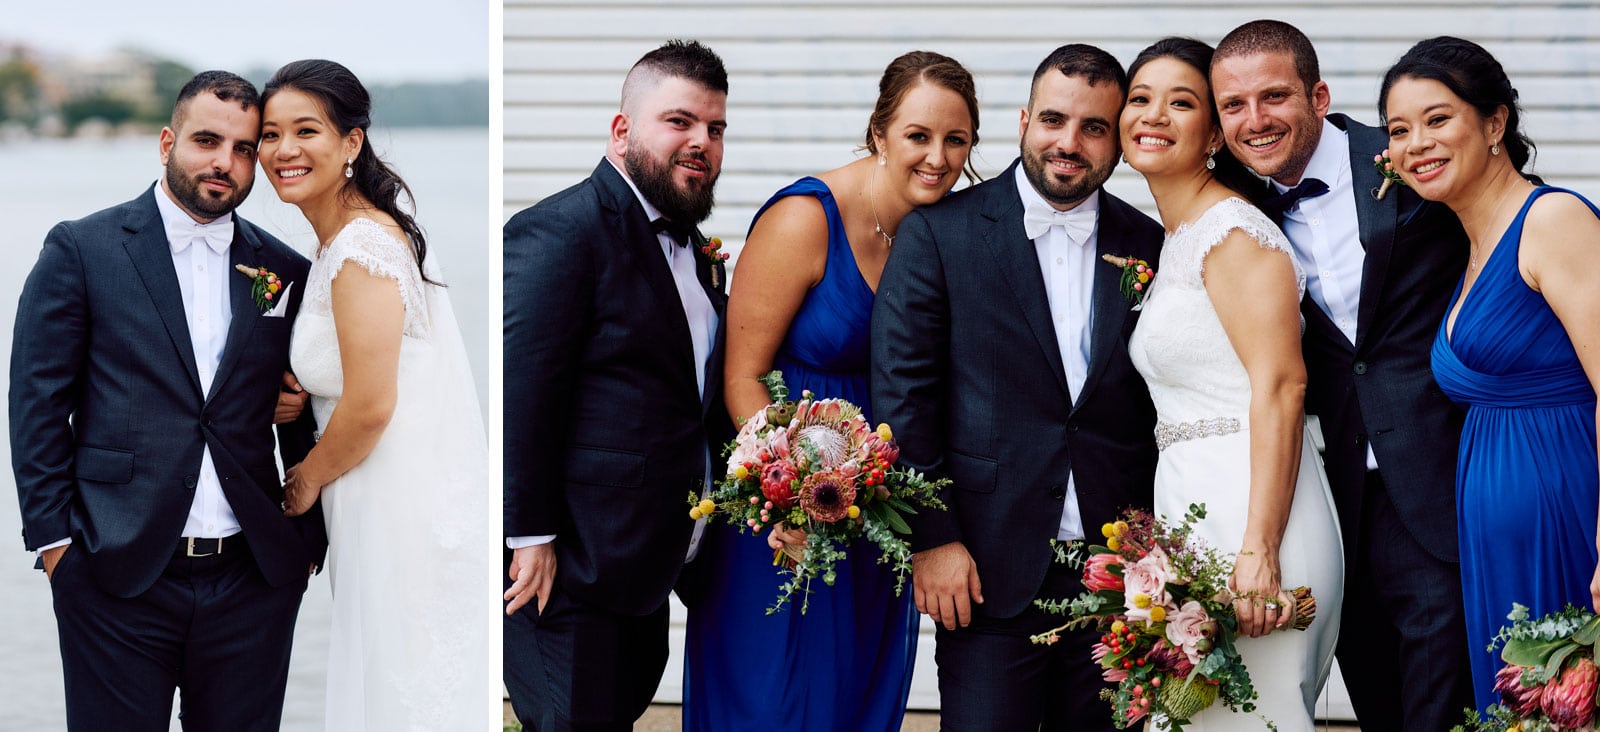 Wedding party photos for Christie and Sharbel at The Kyle Bay on Georges River